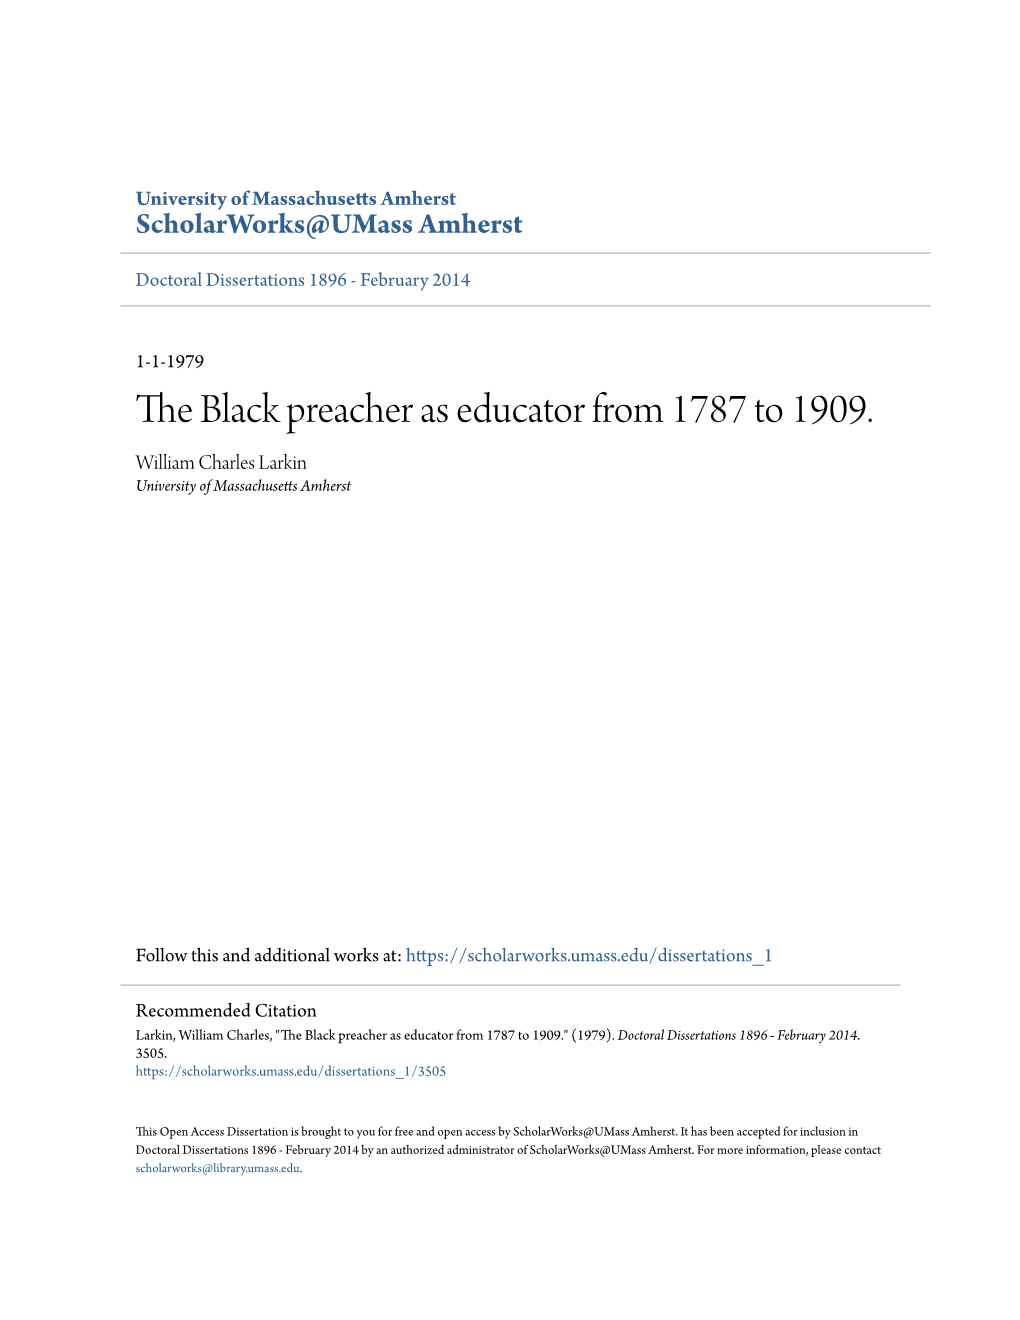 The Black Preacher As Educator from 1787 to 1909